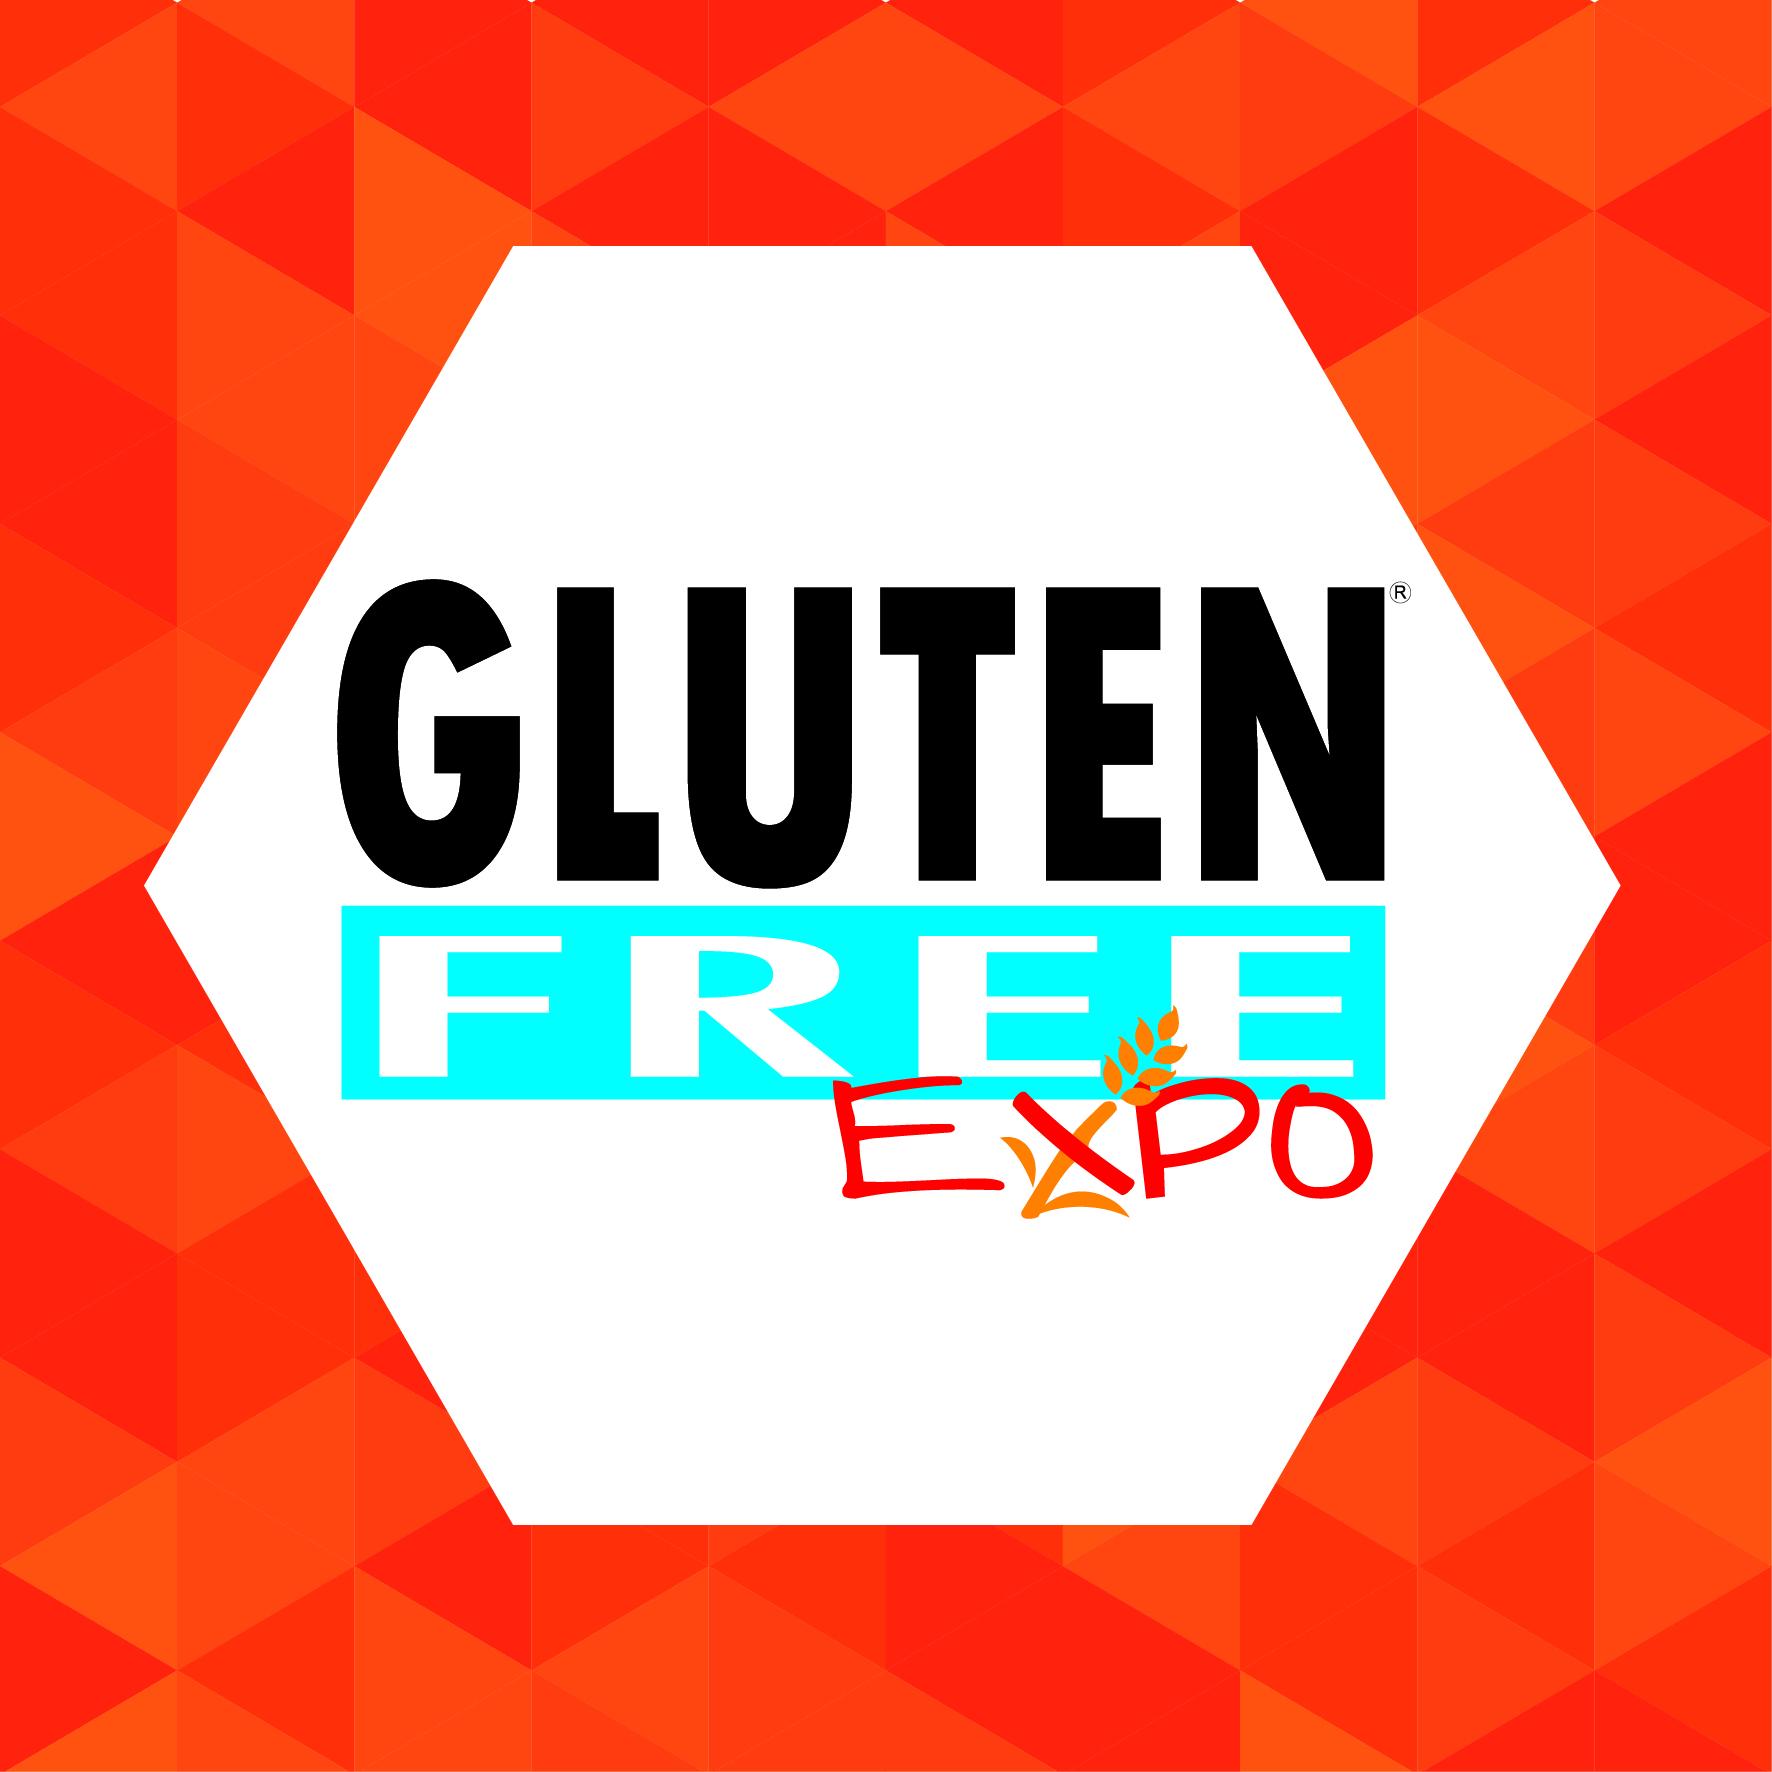 IEG: GLUTEN FREE EXPO & LACTOSE FREE EXPO 2018, THE INTERNATIONAL HUB DEDICATED TO FREE FROM NUTRITION